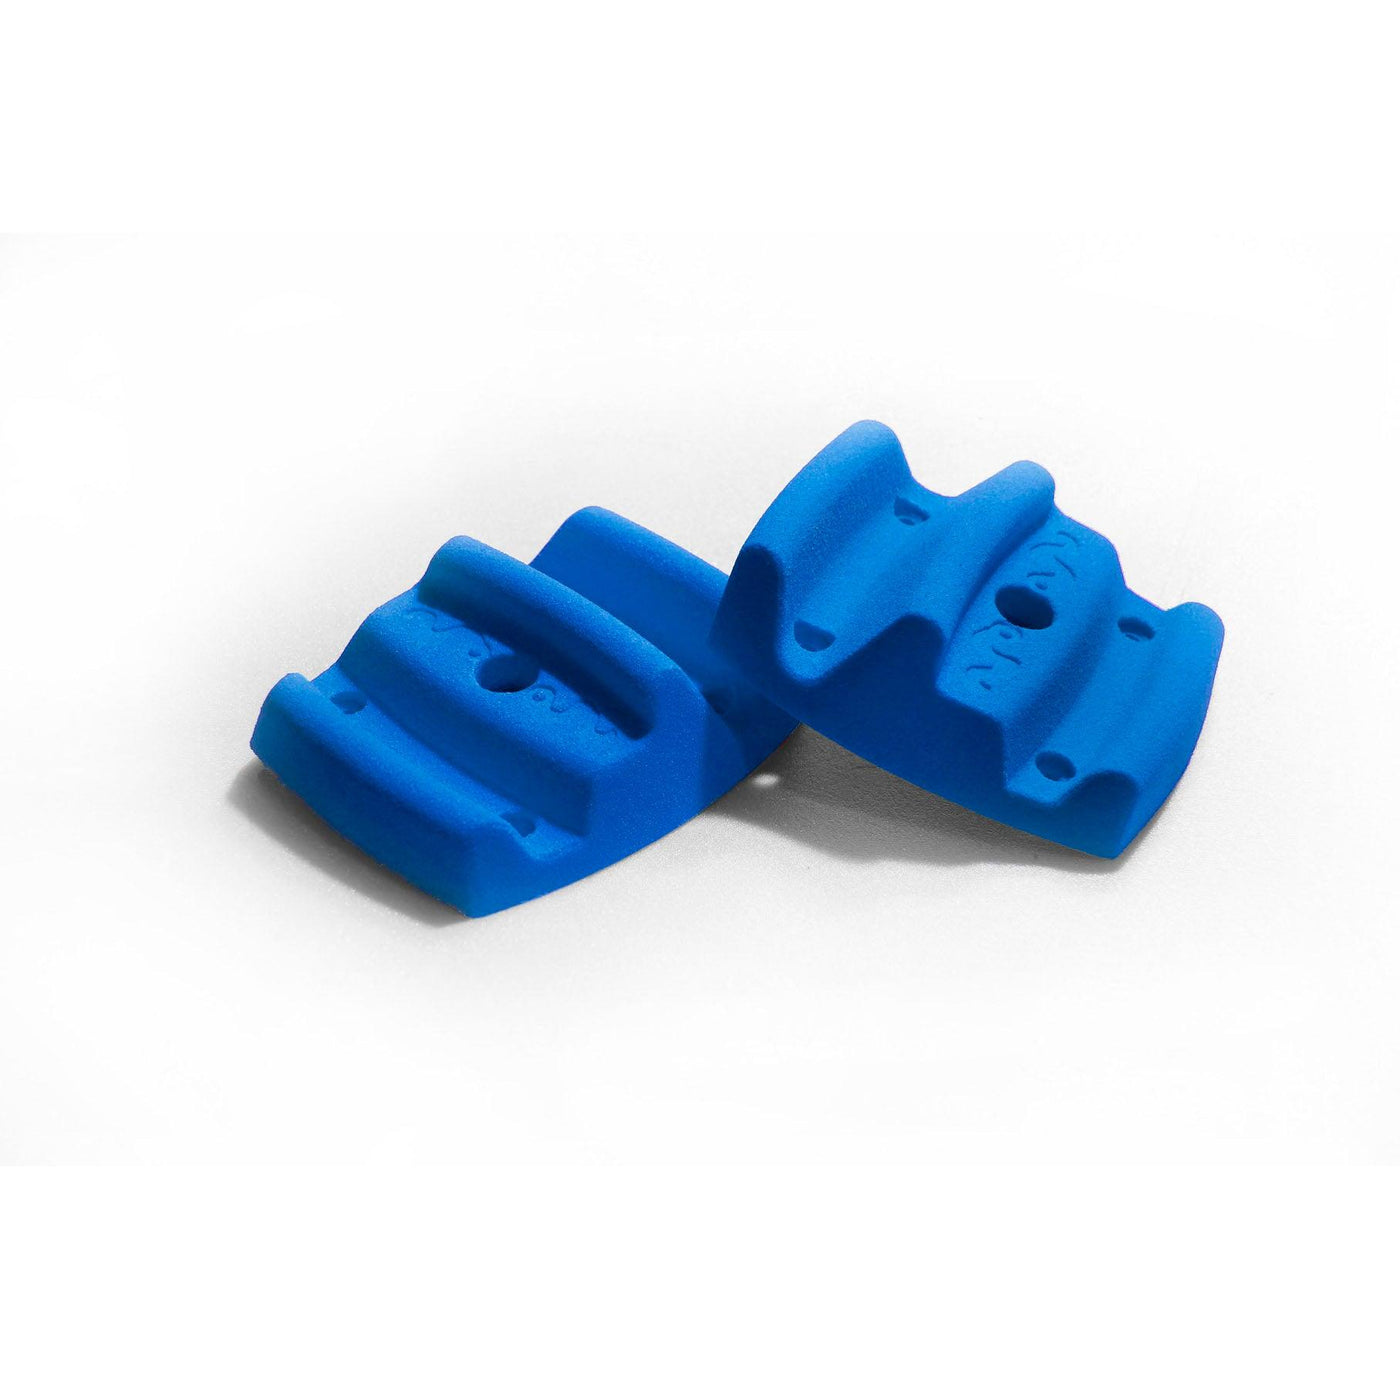 Crimpgimp is a training tool to train on crimps for climbers - Max Climbing - blue